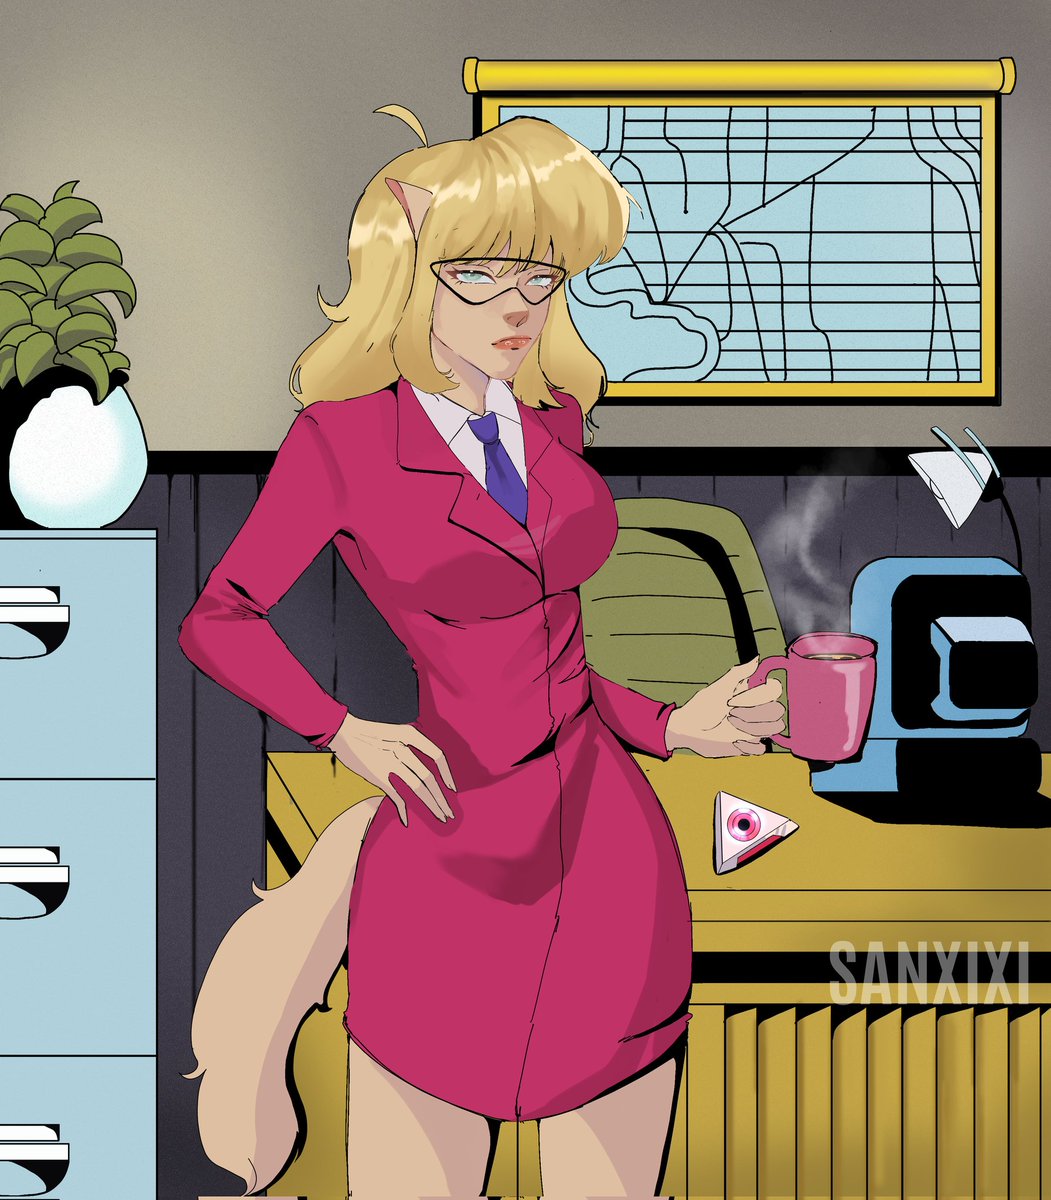 Deputy Mayor #CallieBriggs hasn't even had a chance to sip her coffee yet, and you're already bringing her problems? ☕️😒 #SWATKats #FanArt #Commission